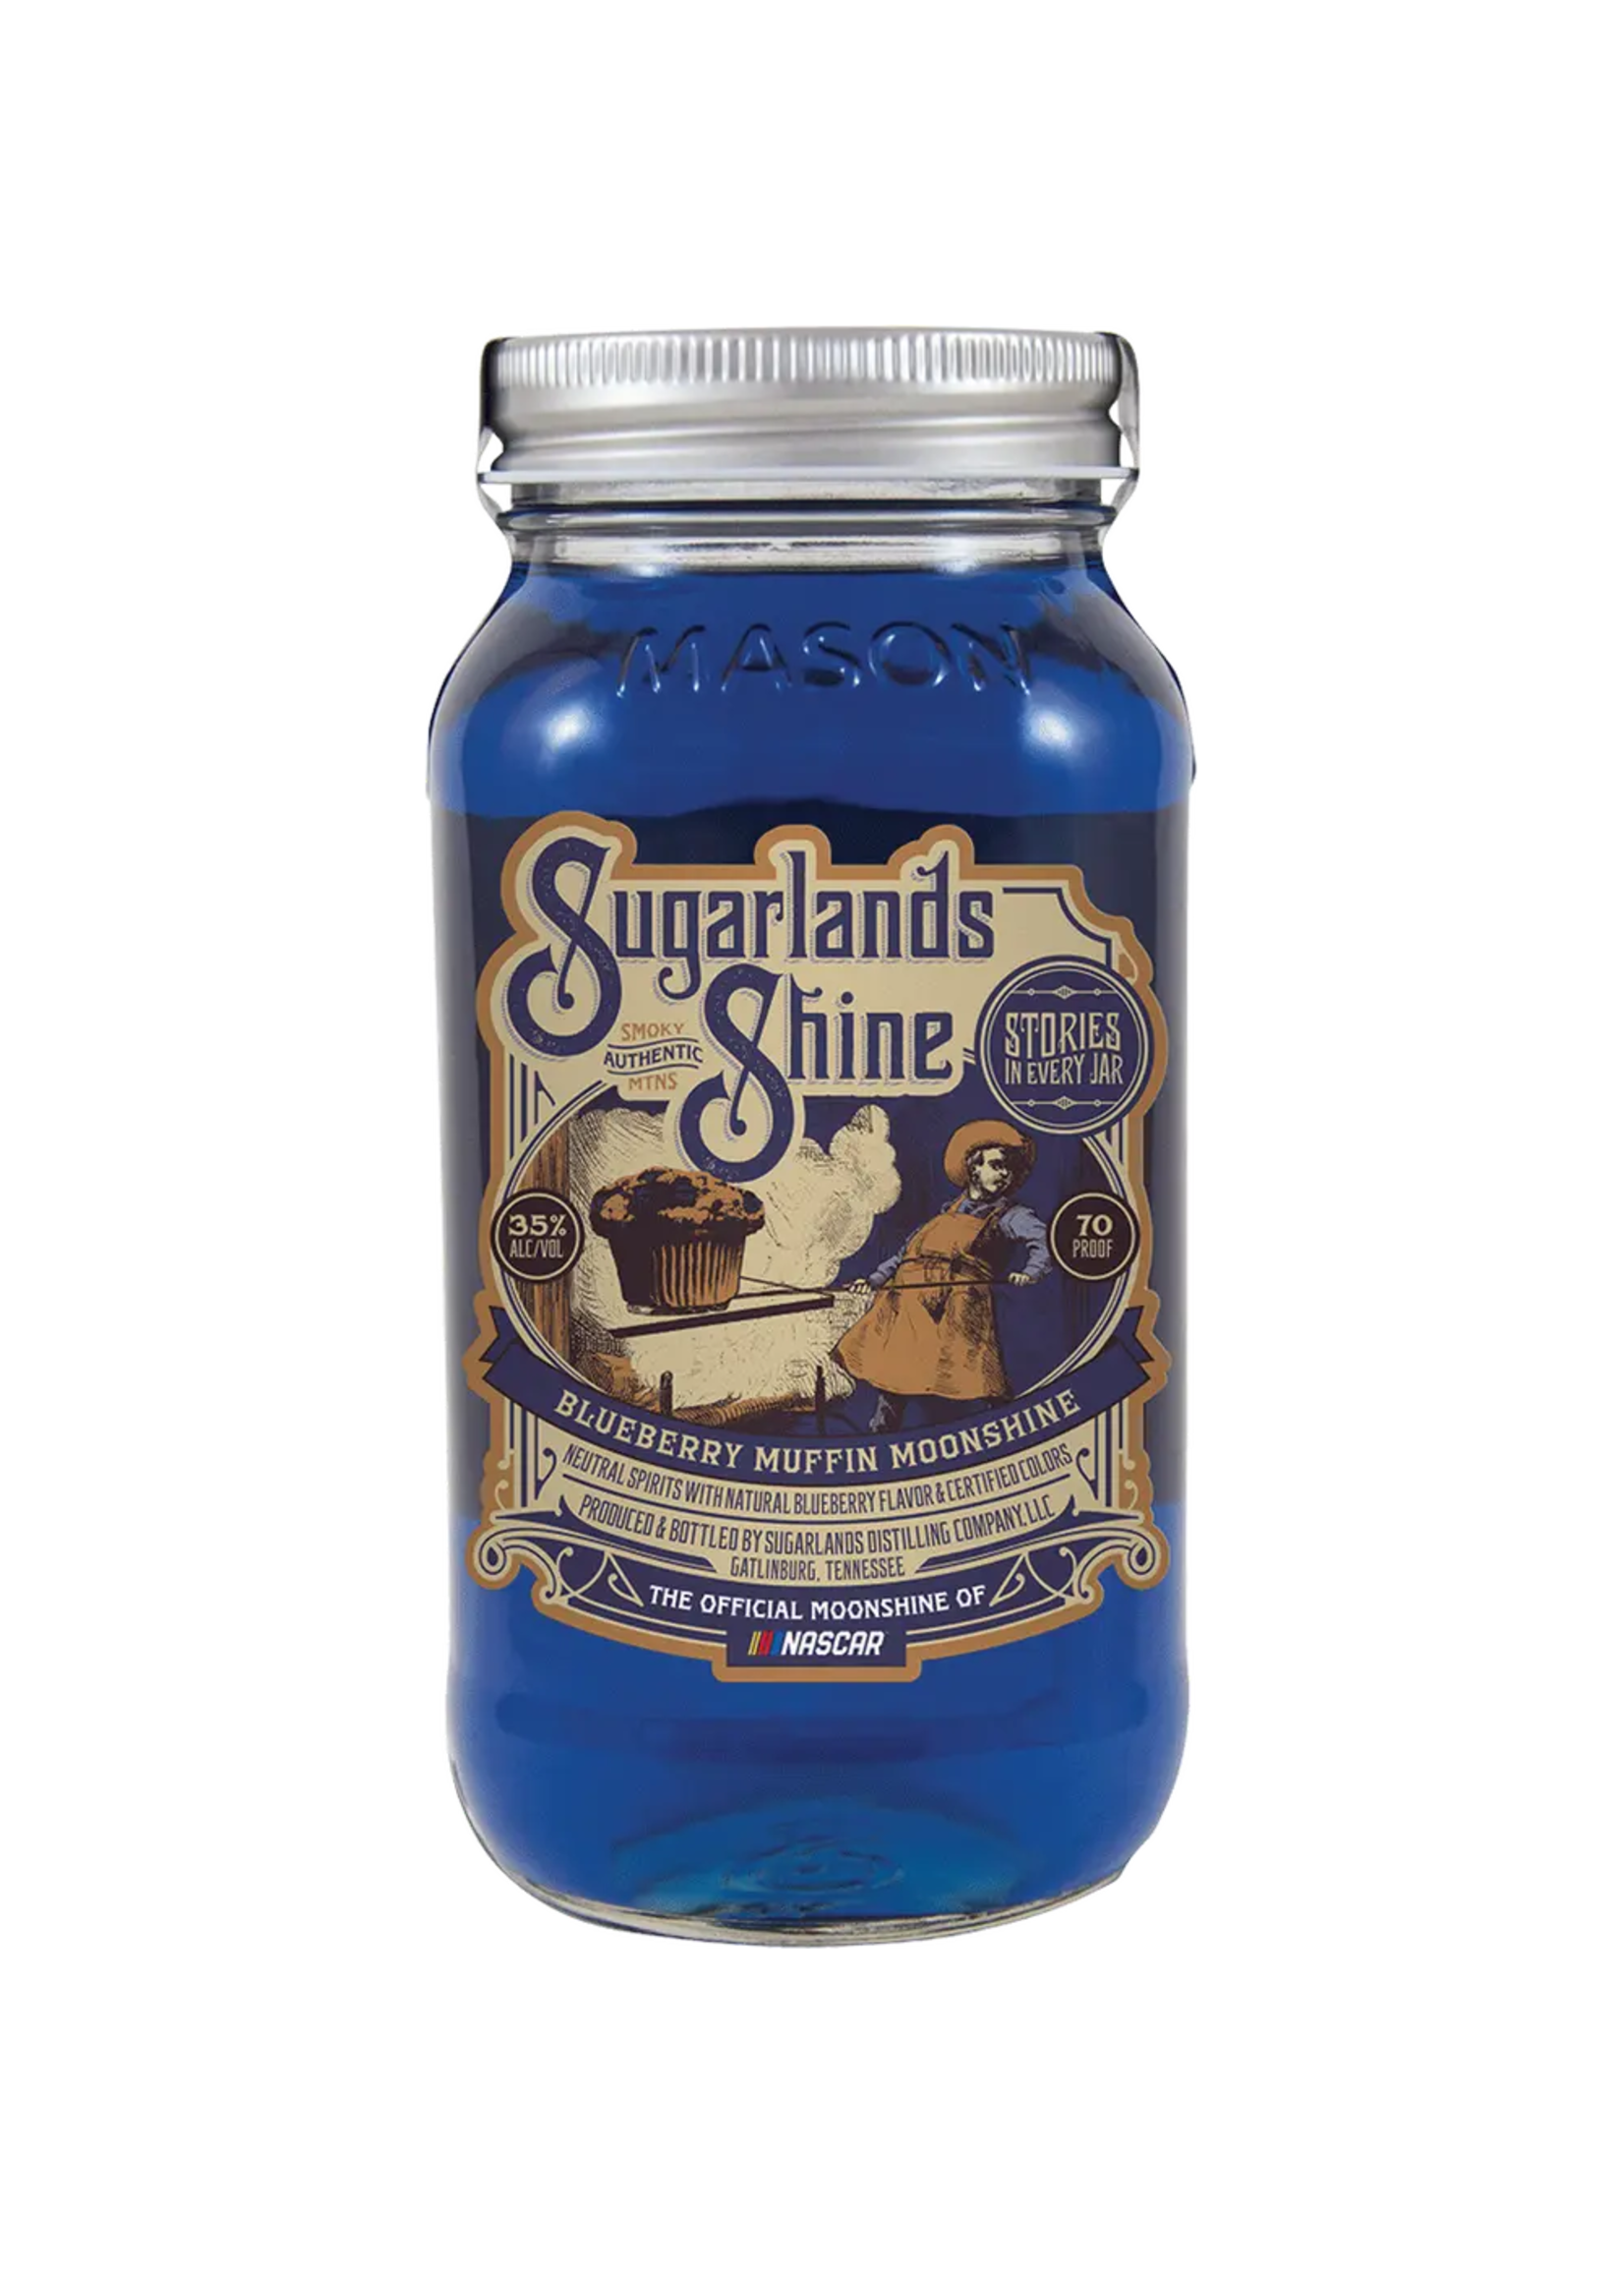 Sugarlands Moonshine & Sippin Cream Sugarlands Shine Blueberry Muffin Moonshine 70Proof Jar 750ml